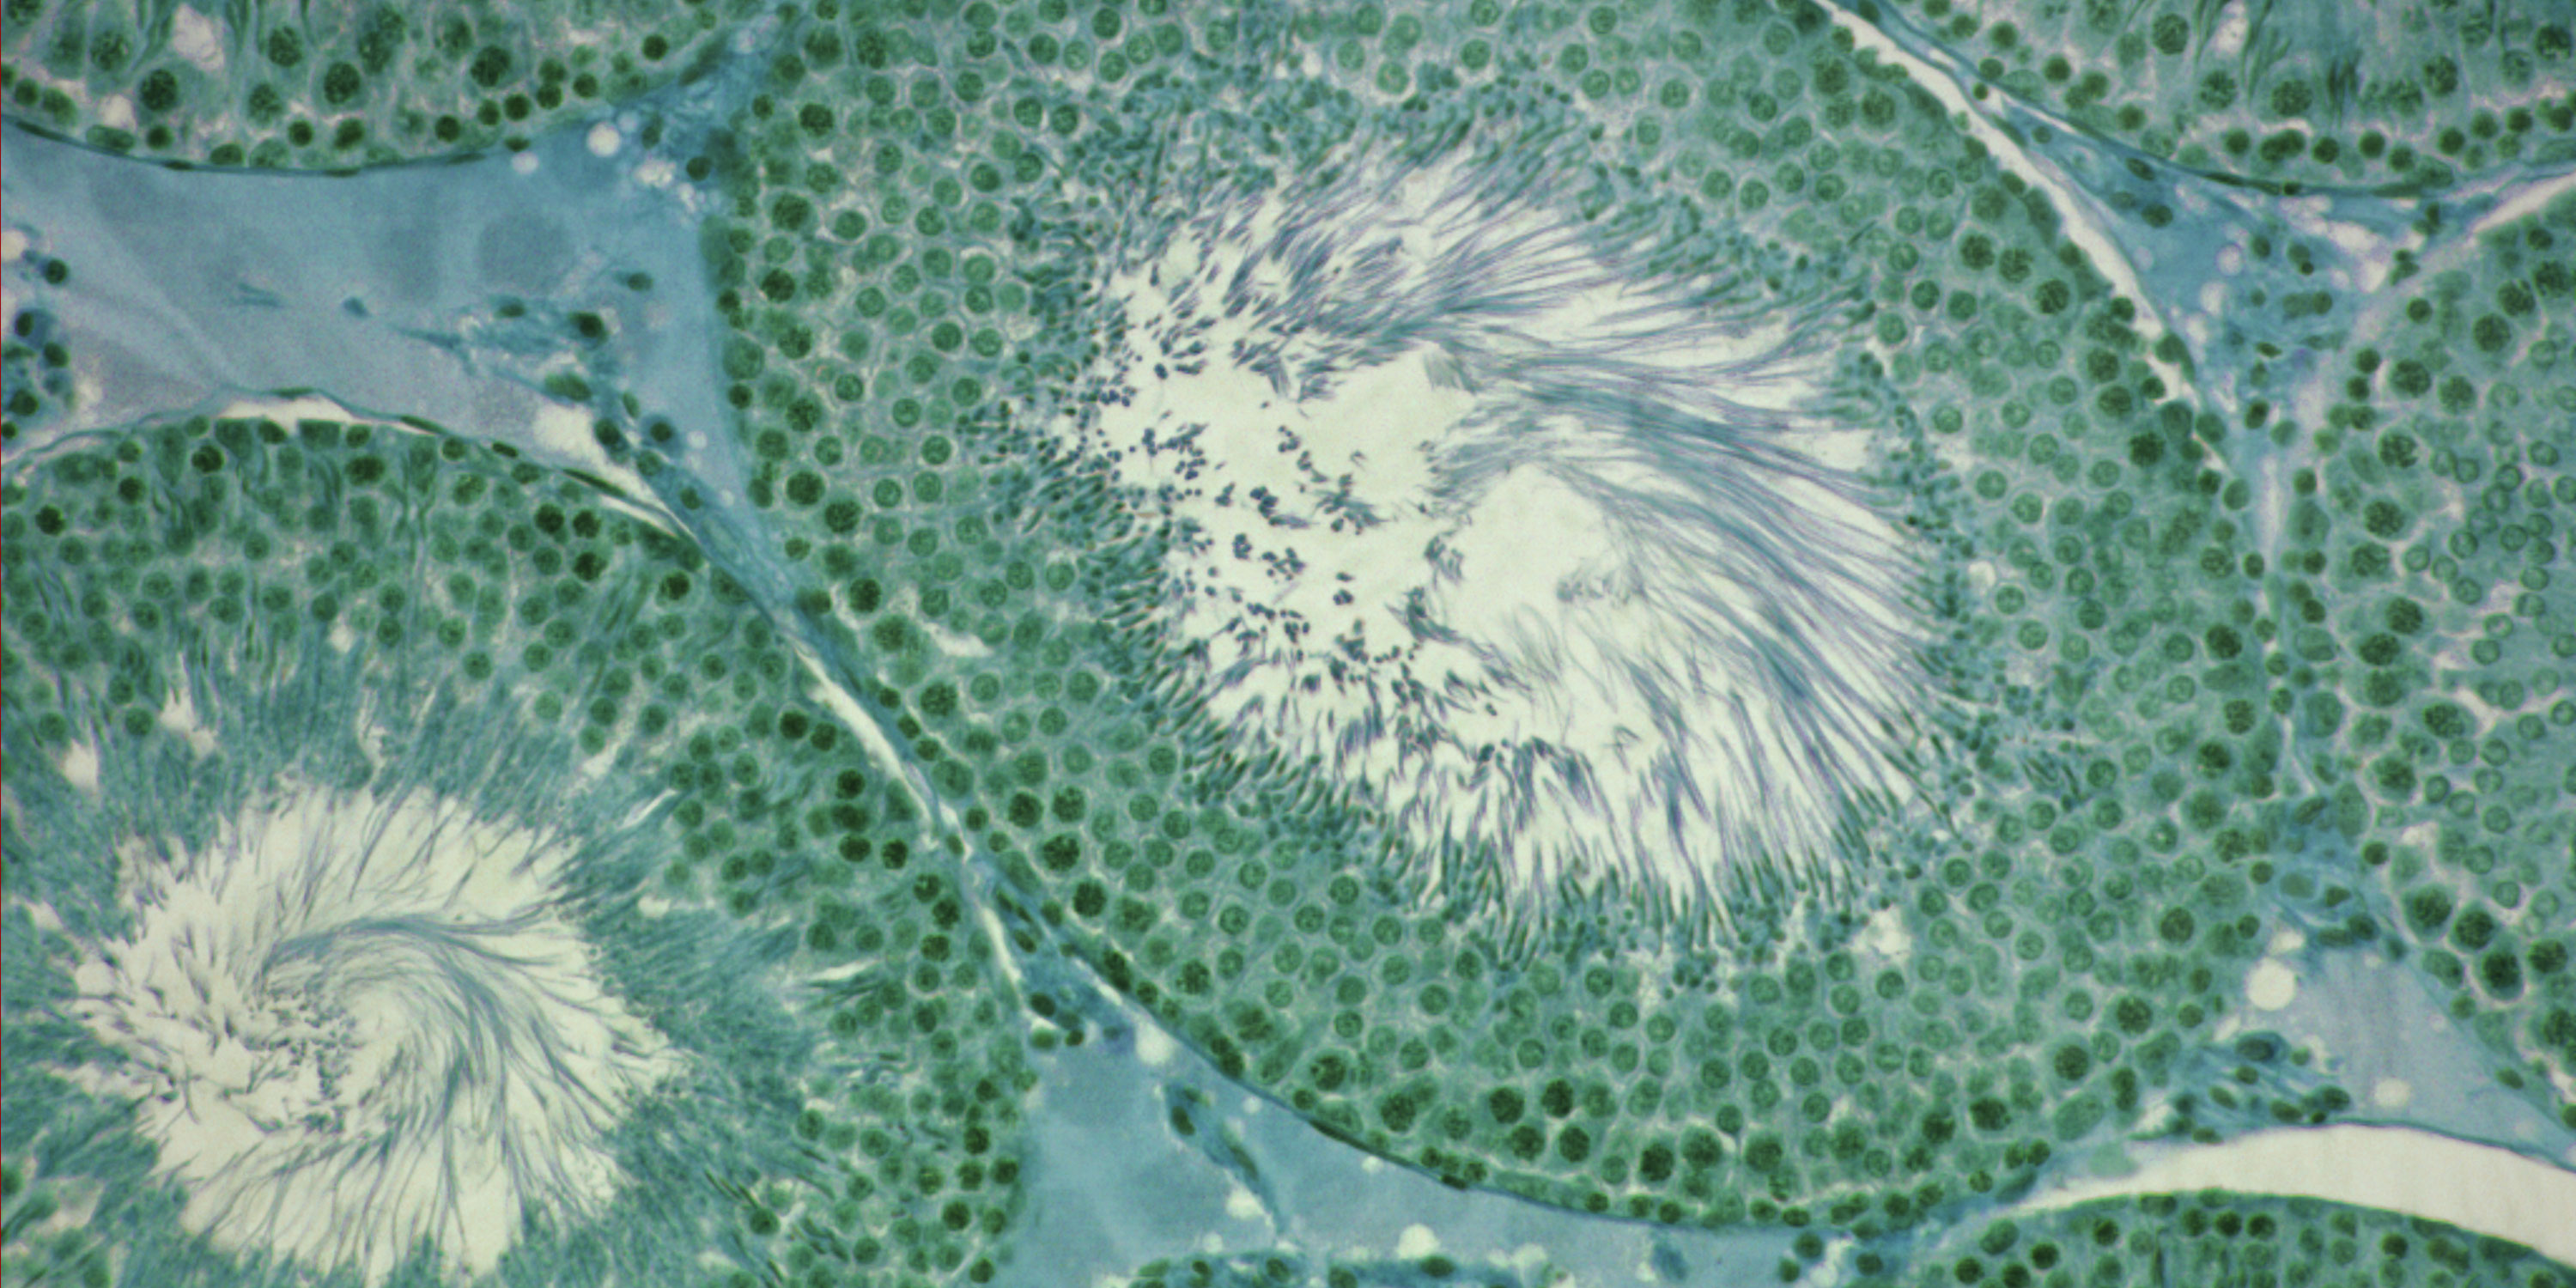 Microscope image of a rat’s testicles. This forms part of DTU’s research into the damaging effects of endocrine disrupters. And studies of how even small doses can have significant adverse effects if they occur in a cocktail of chemicals.